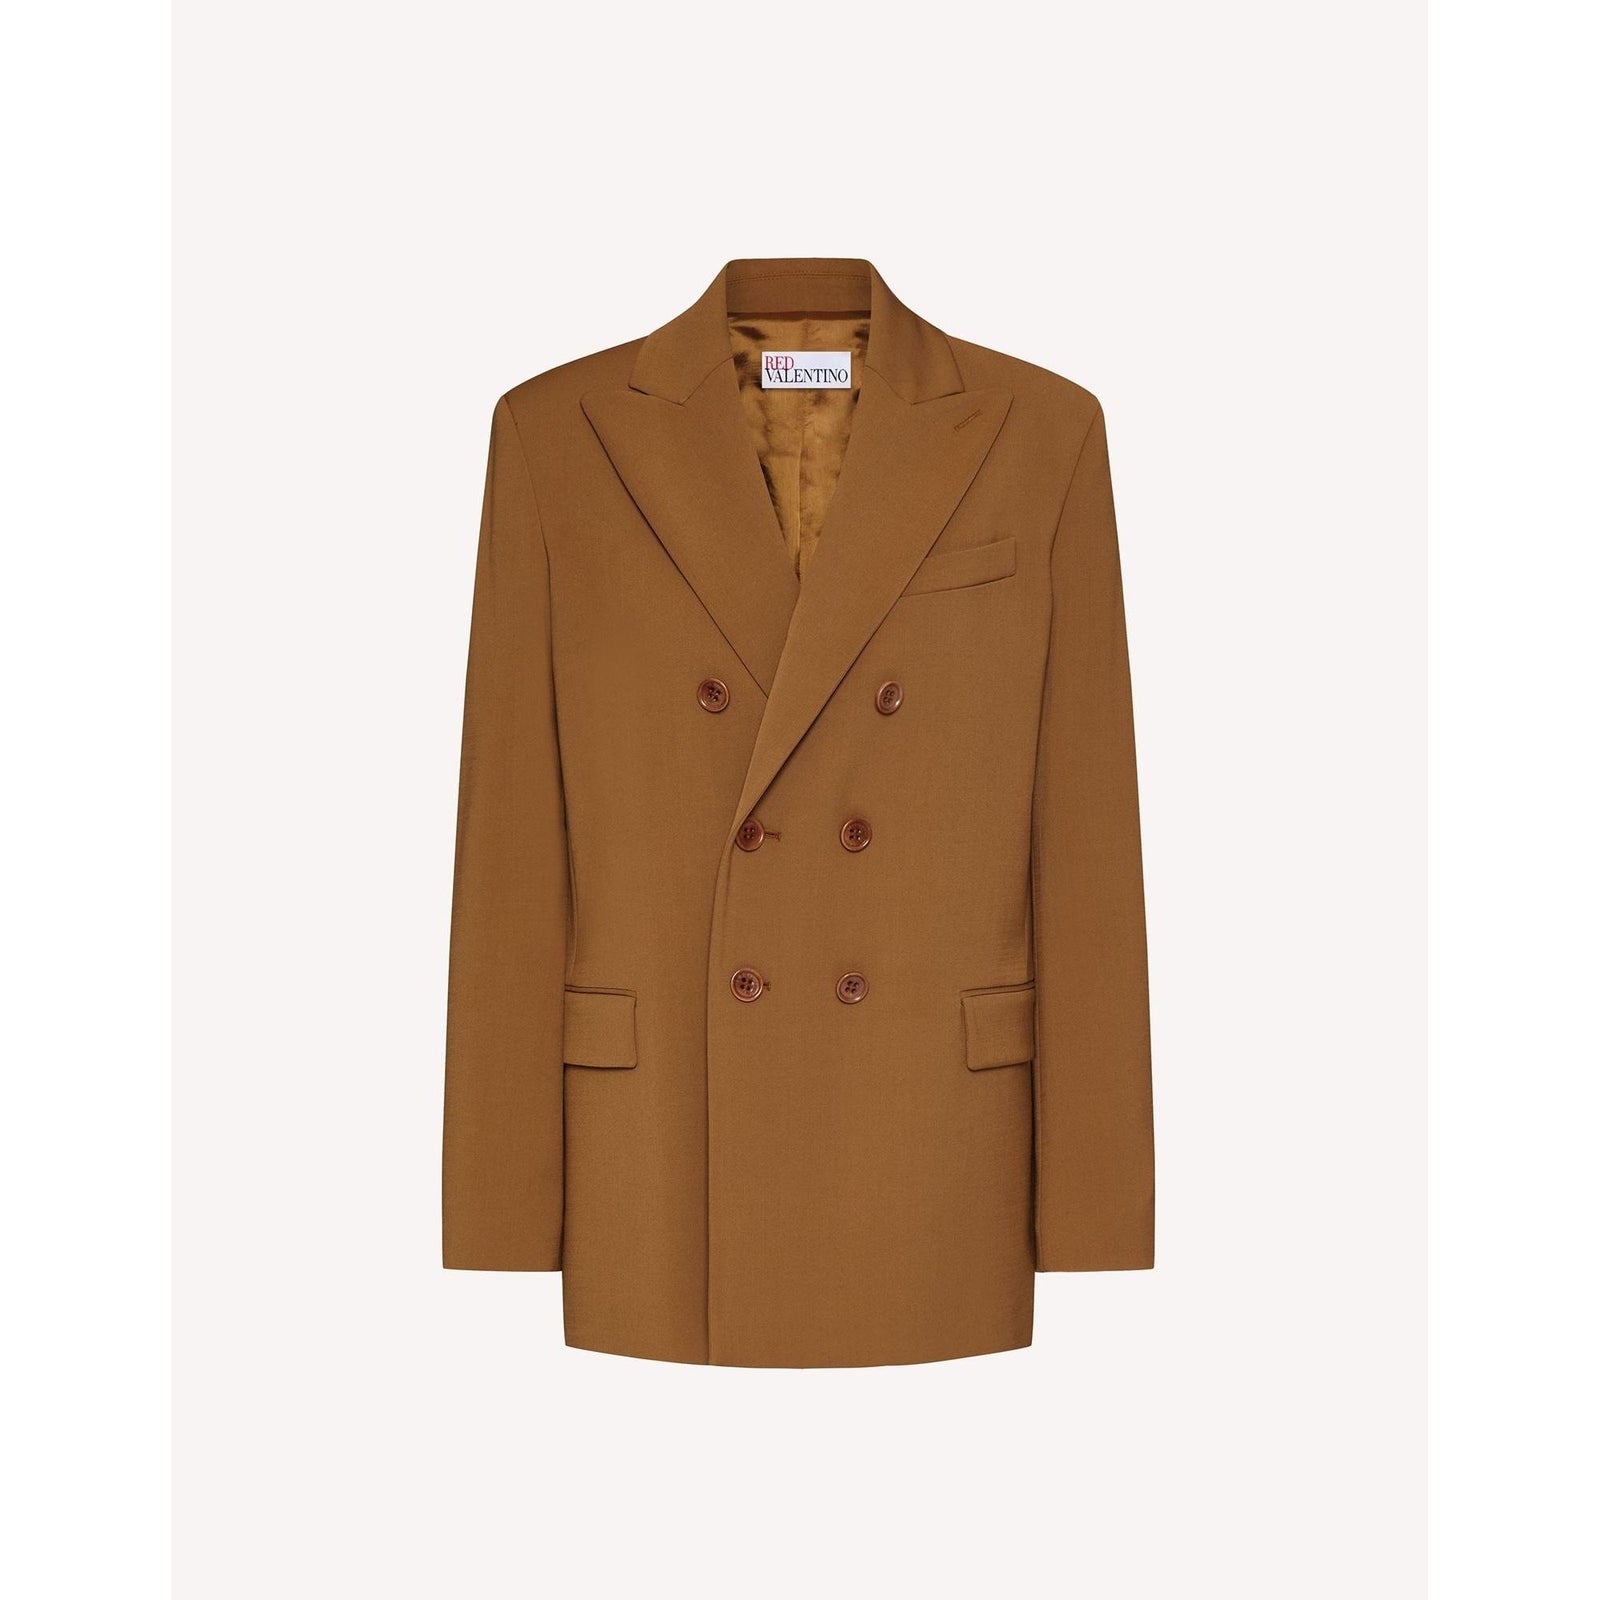 RED VALENTINO DOUBLE-BREASTED JACKET IN VISCOSE WOOL GABARDINE - Yooto